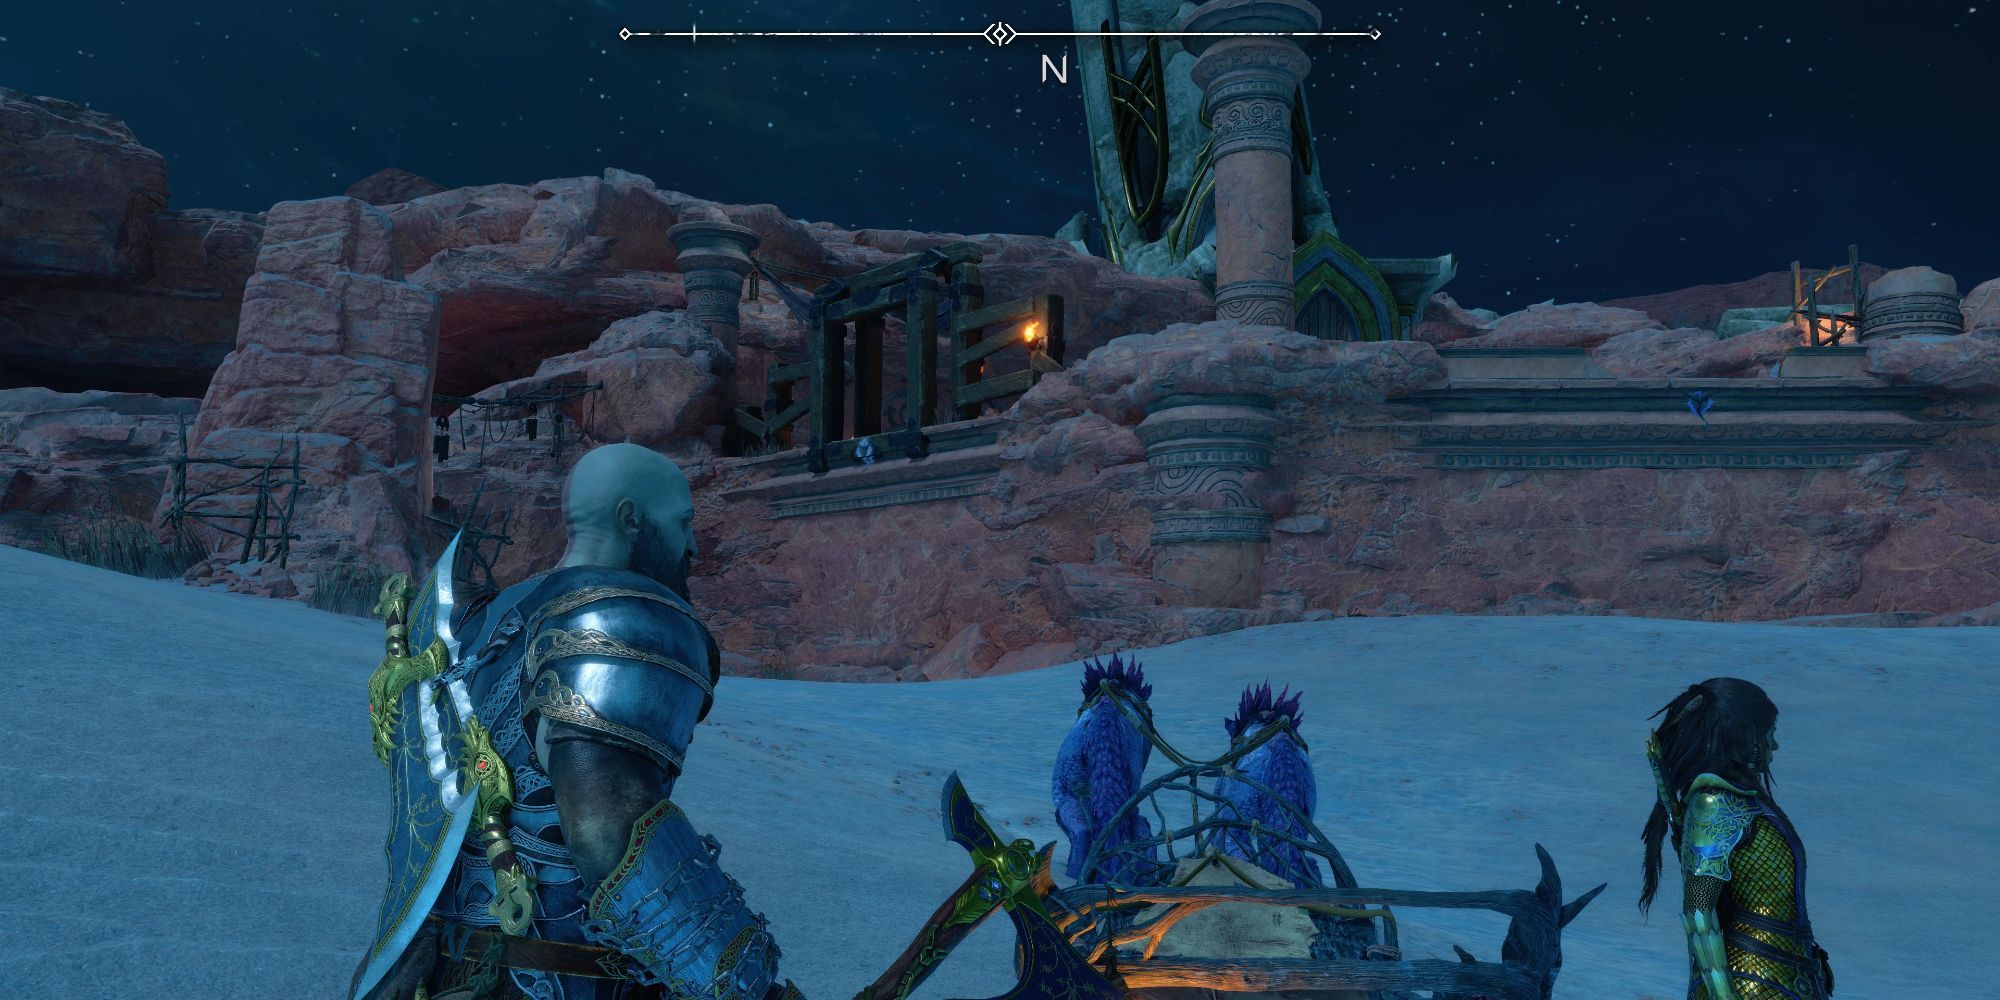 Kratos in front of the Alfheim Yggdrasil Rift building location